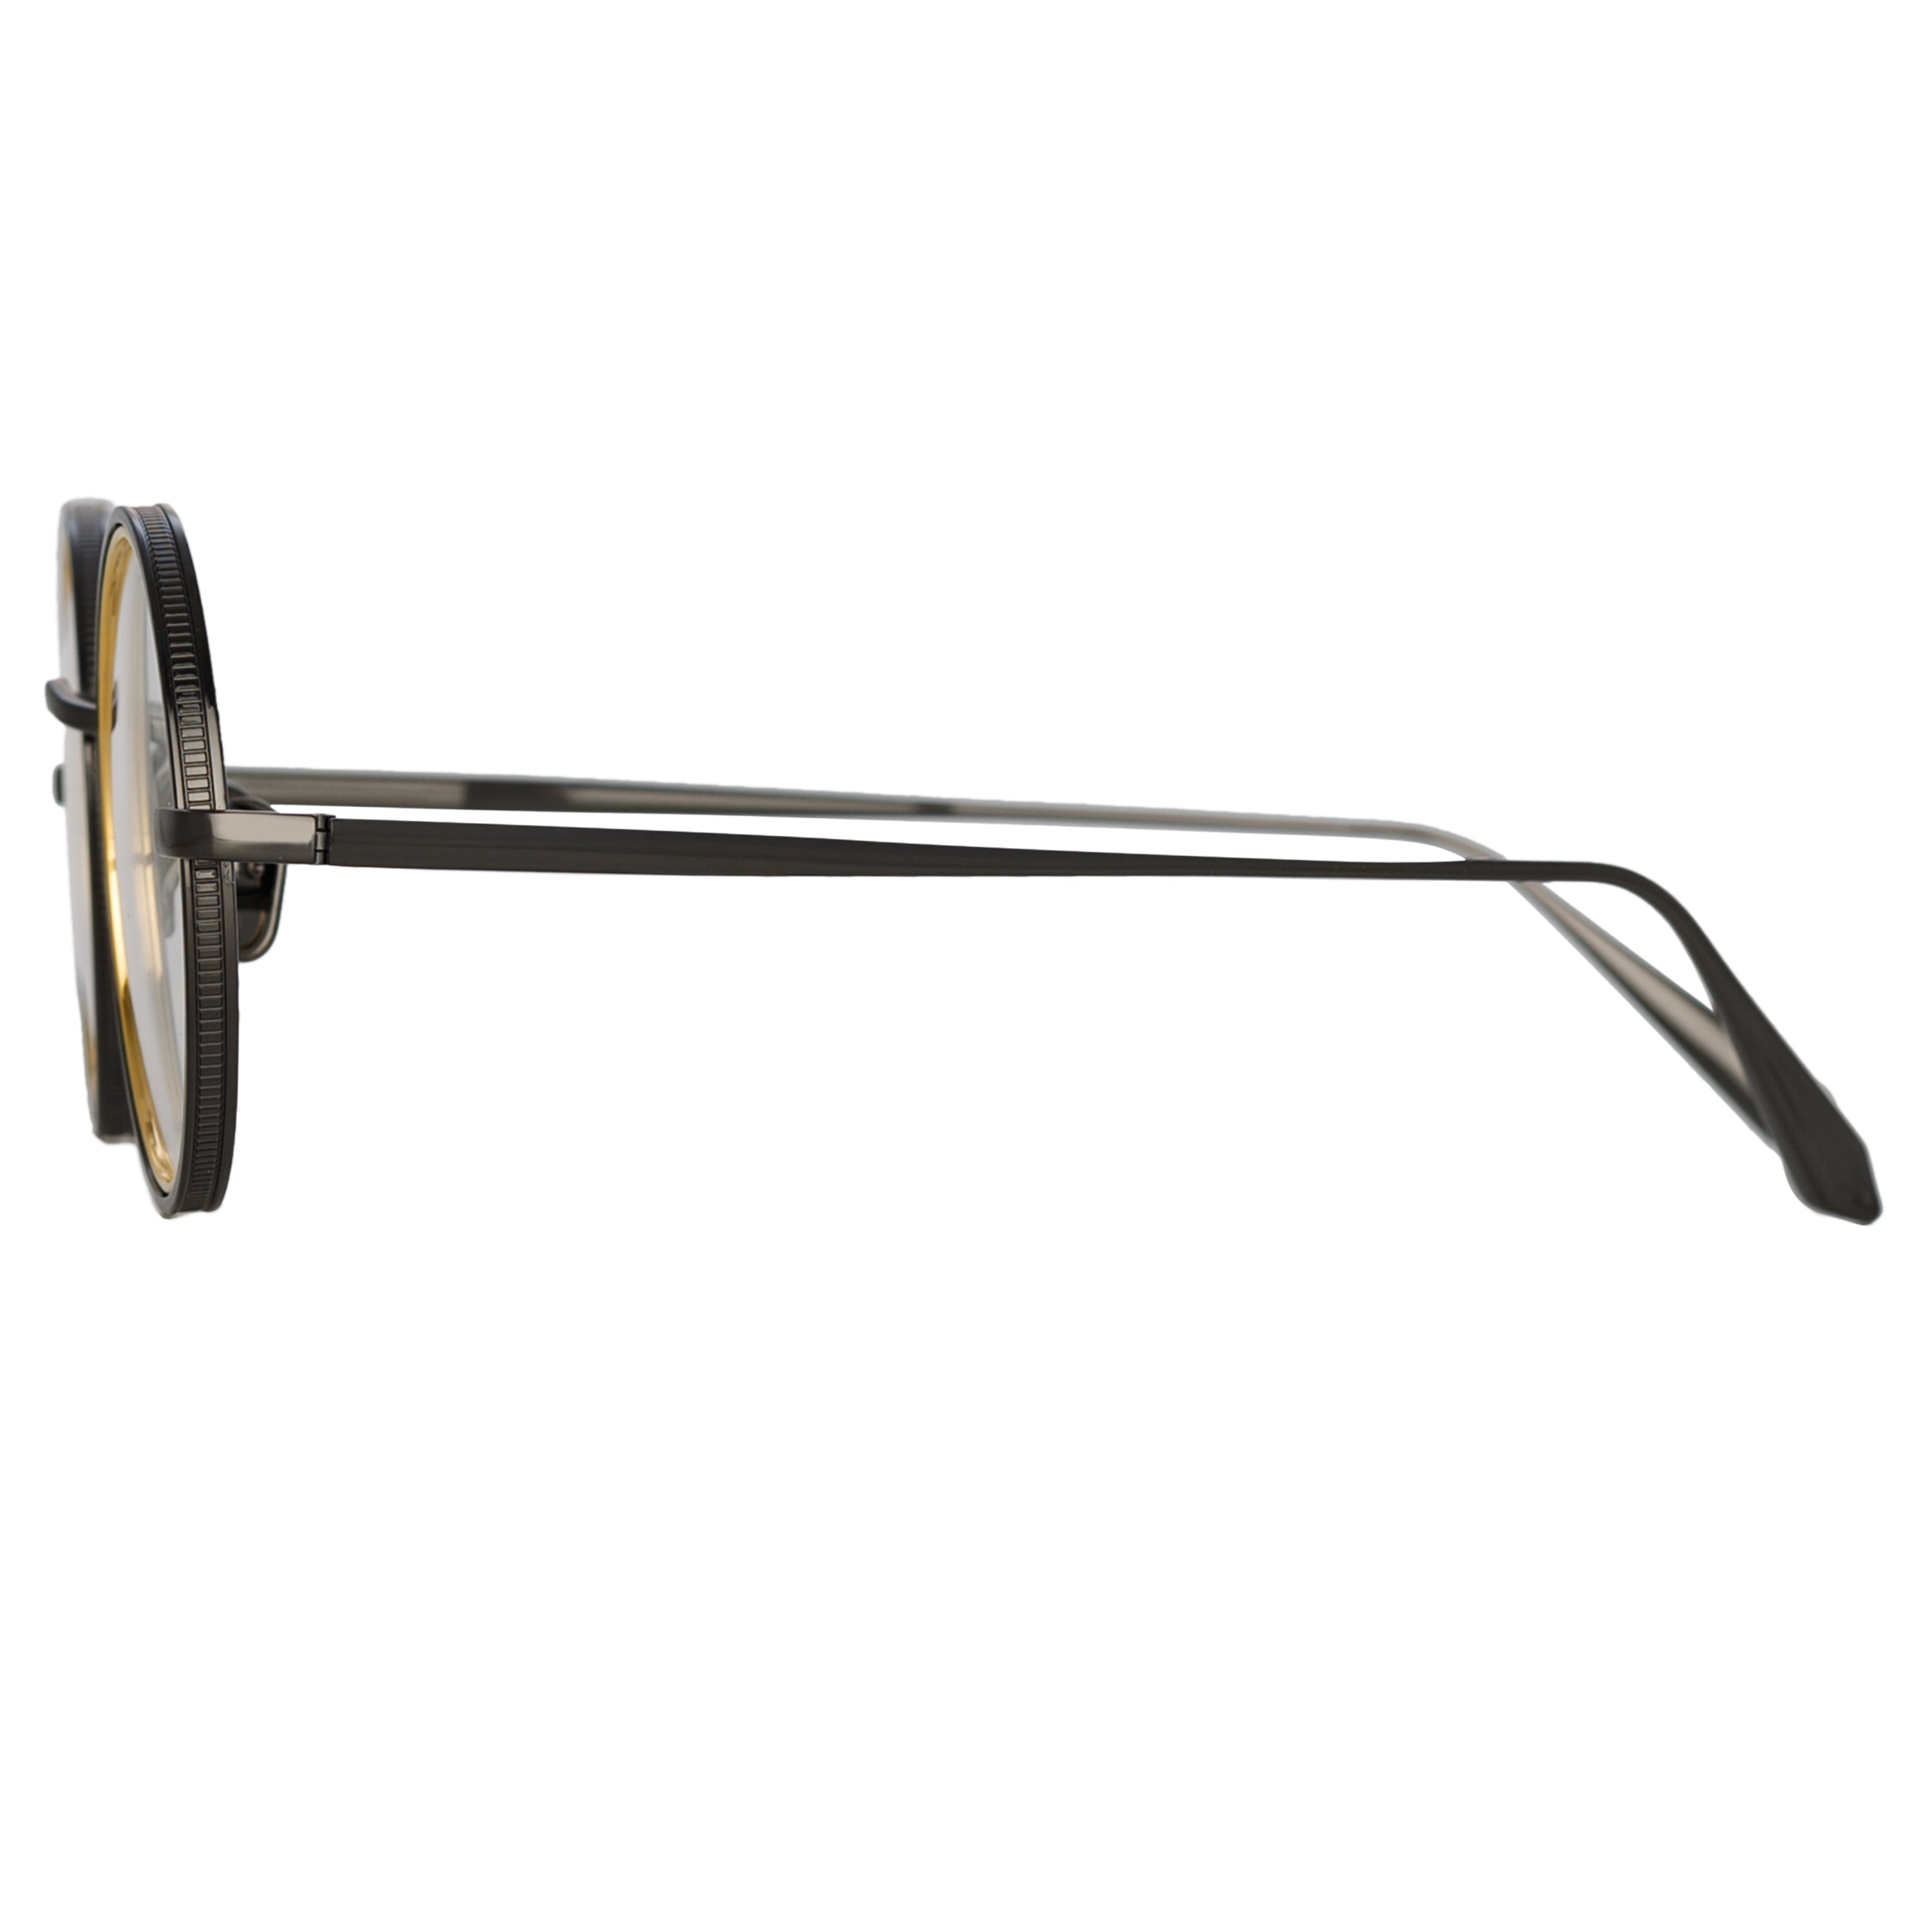 CORTINA OVAL OPTICAL FRAME IN NICKEL AND YELLOW GOLD - 3